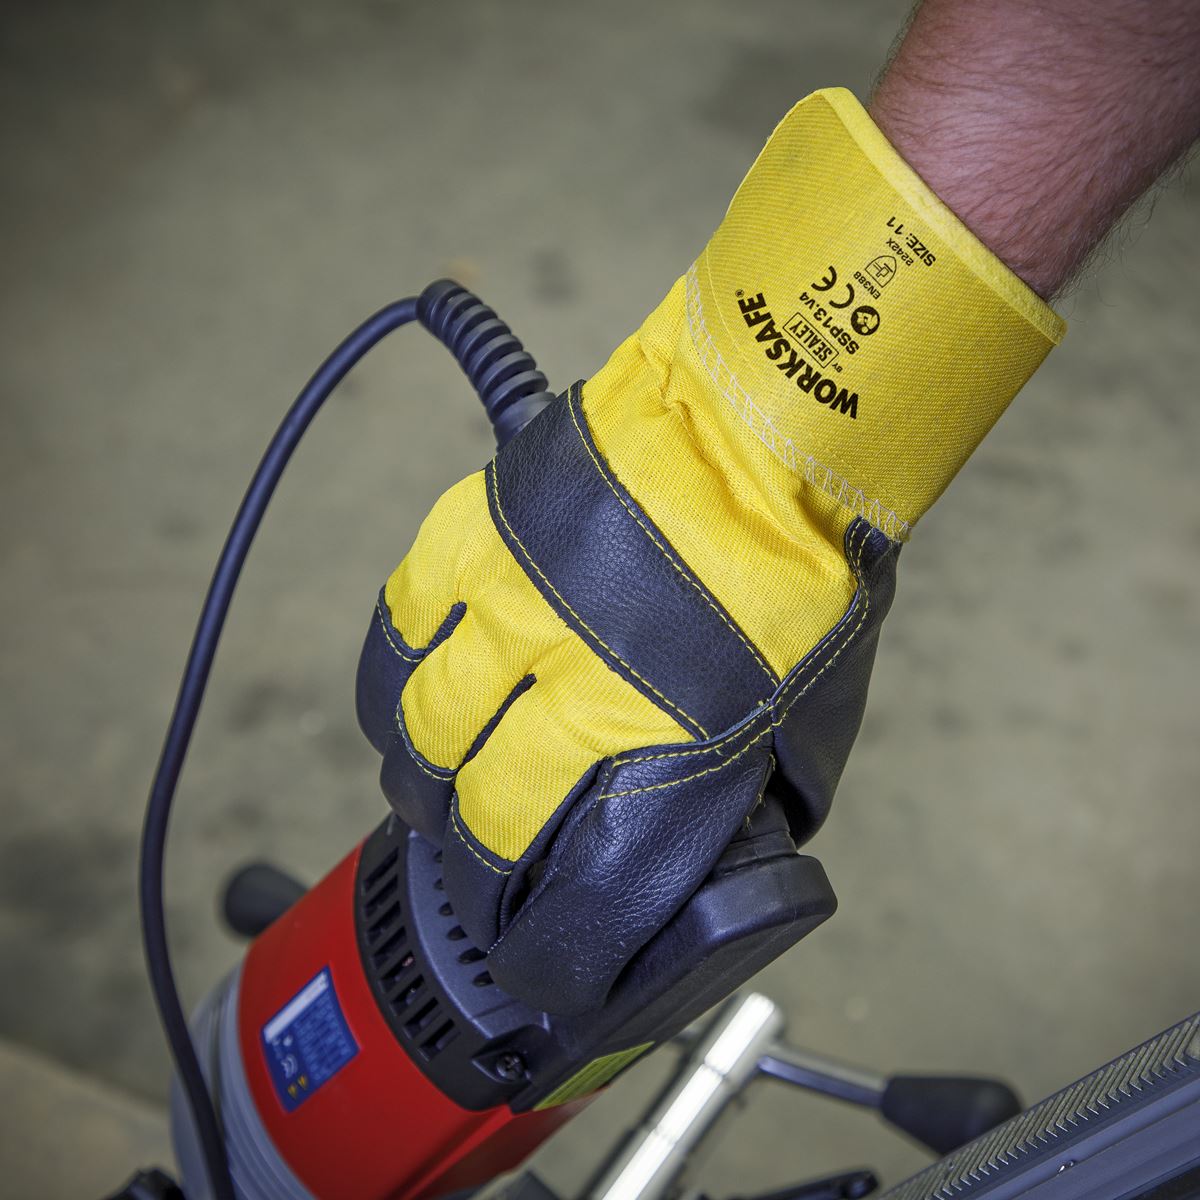 Worksafe by Sealey Rigger's Gloves Hide Palm Pair